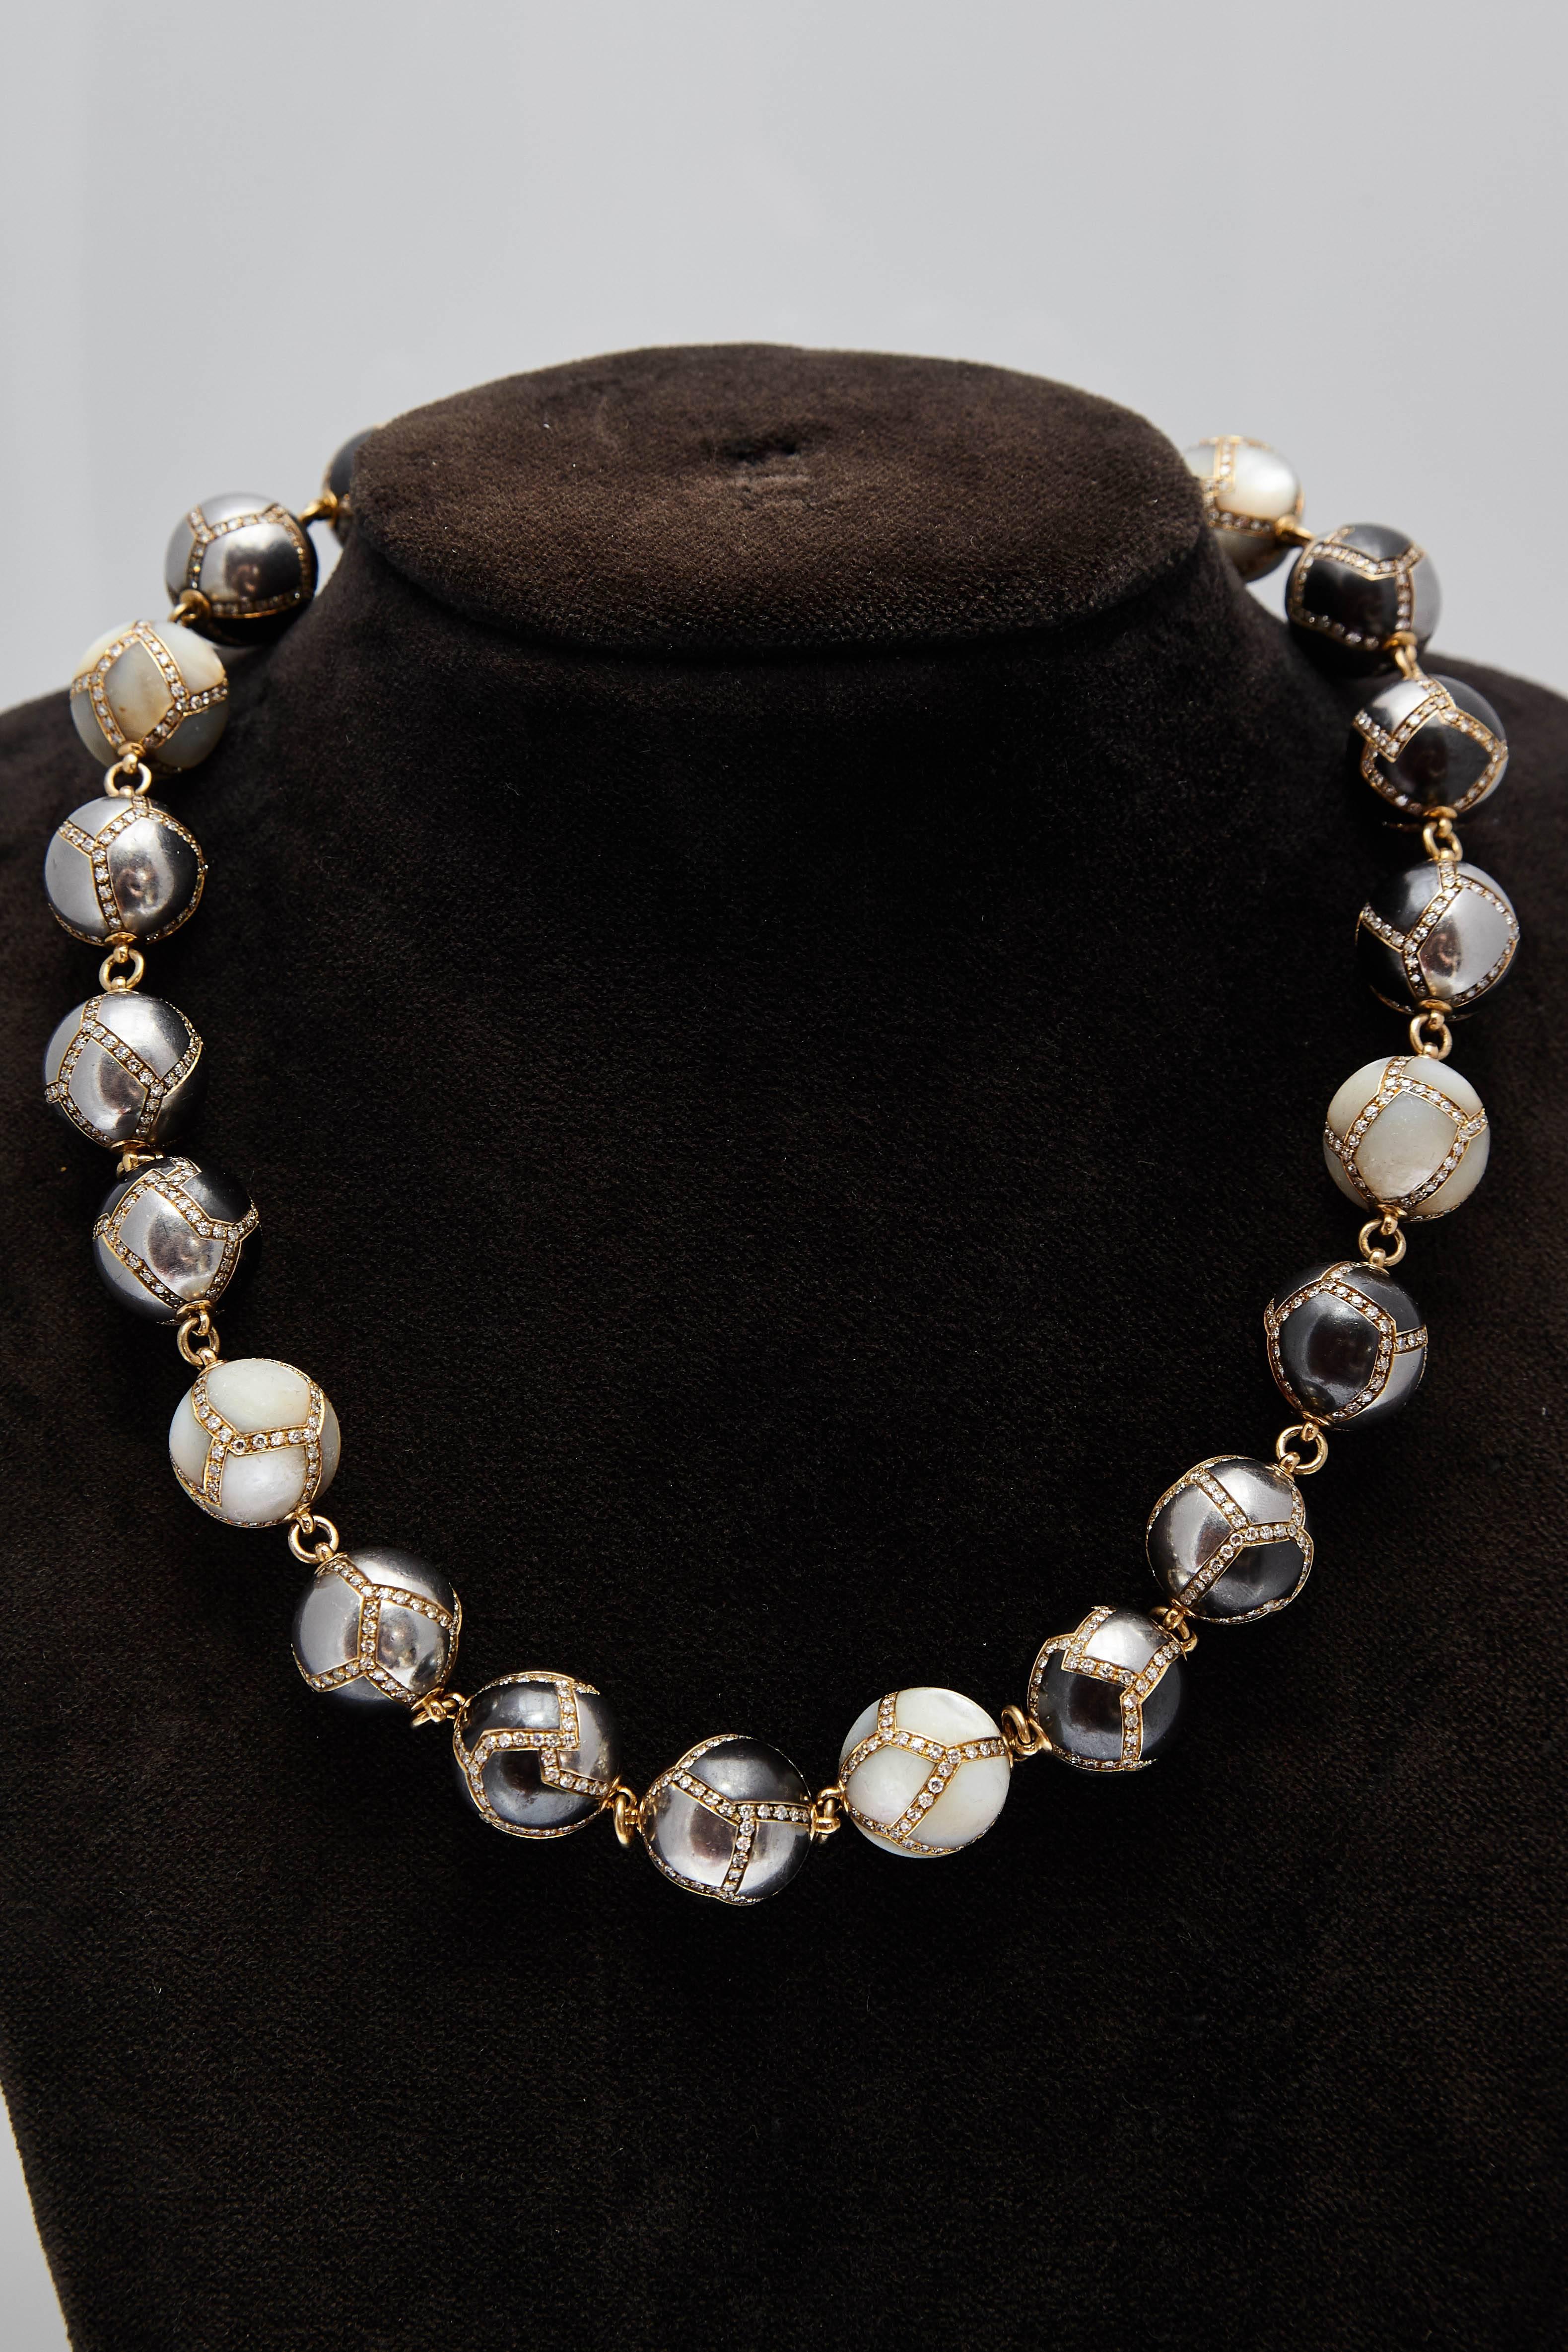 Faraone necklace in 18kt yellow gold with hematite and diamonds spheres. Made in Italy, circa 1970s.